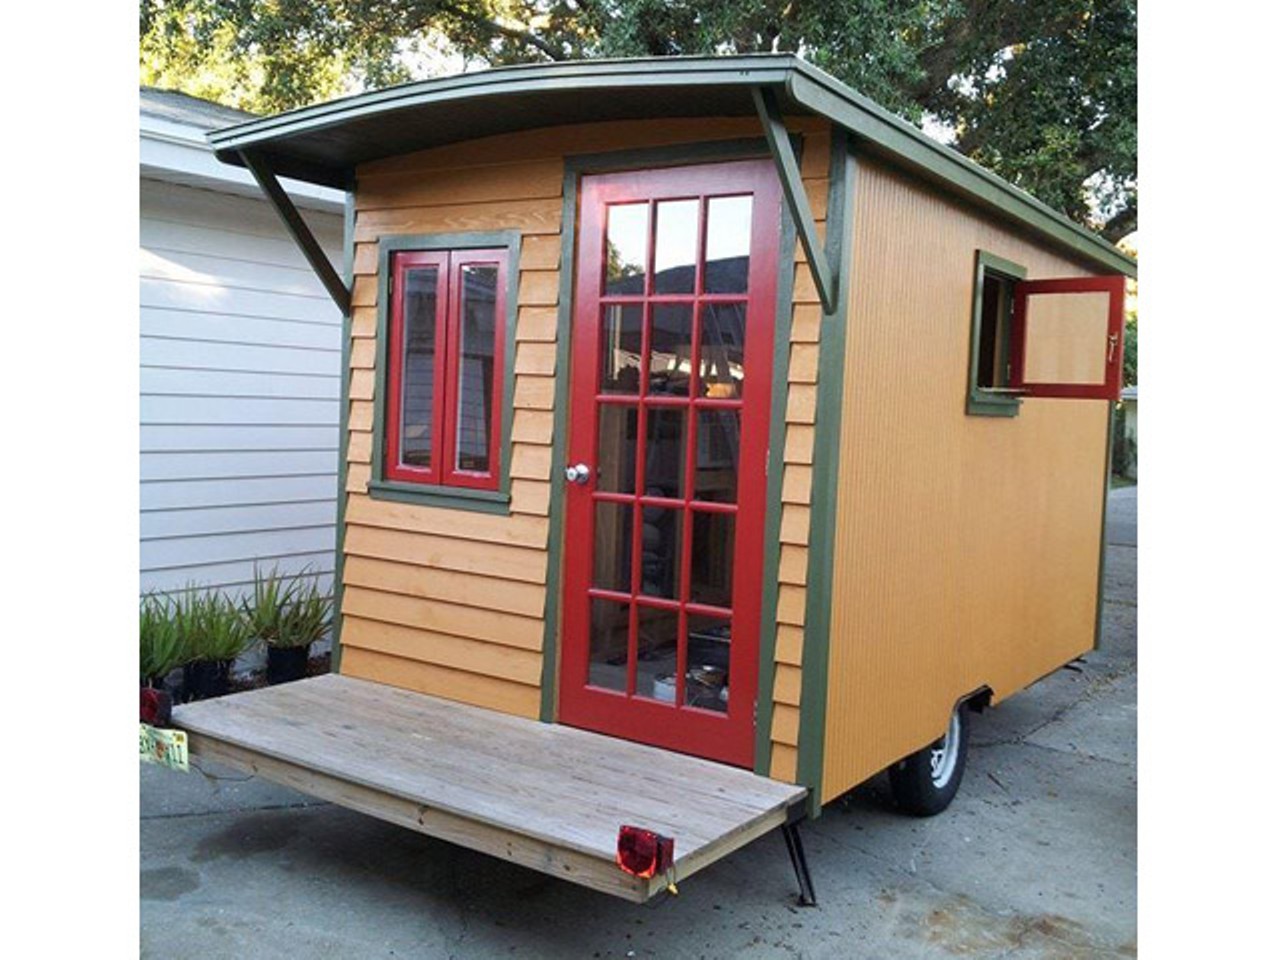 Go mini: 10 charming tiny homes for sale in Florida right now, Orlando